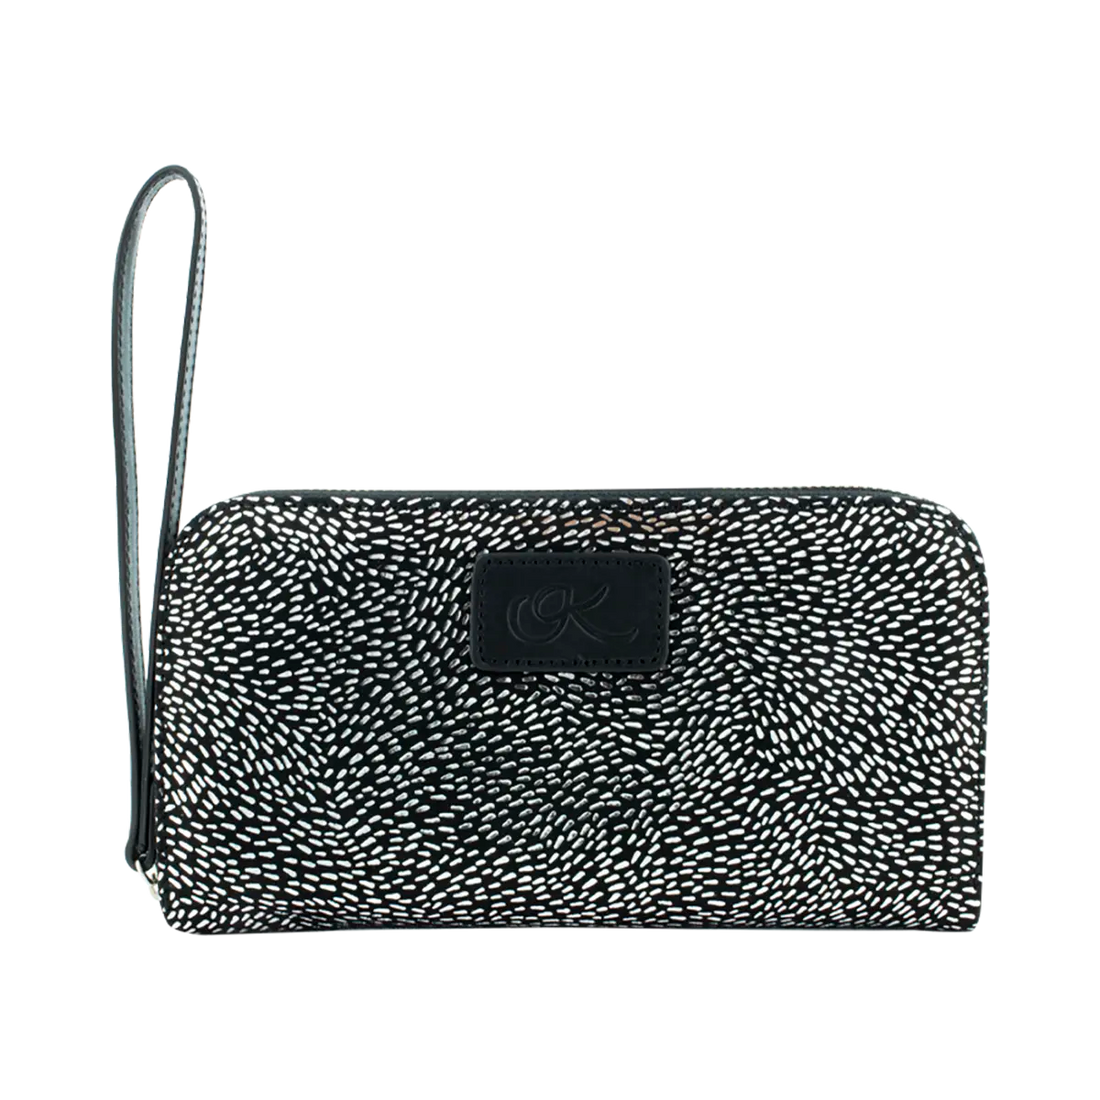 largeblack silver stripe leather wallet with hand strap. Fashion Accessories for women shop in San Diego, CA.